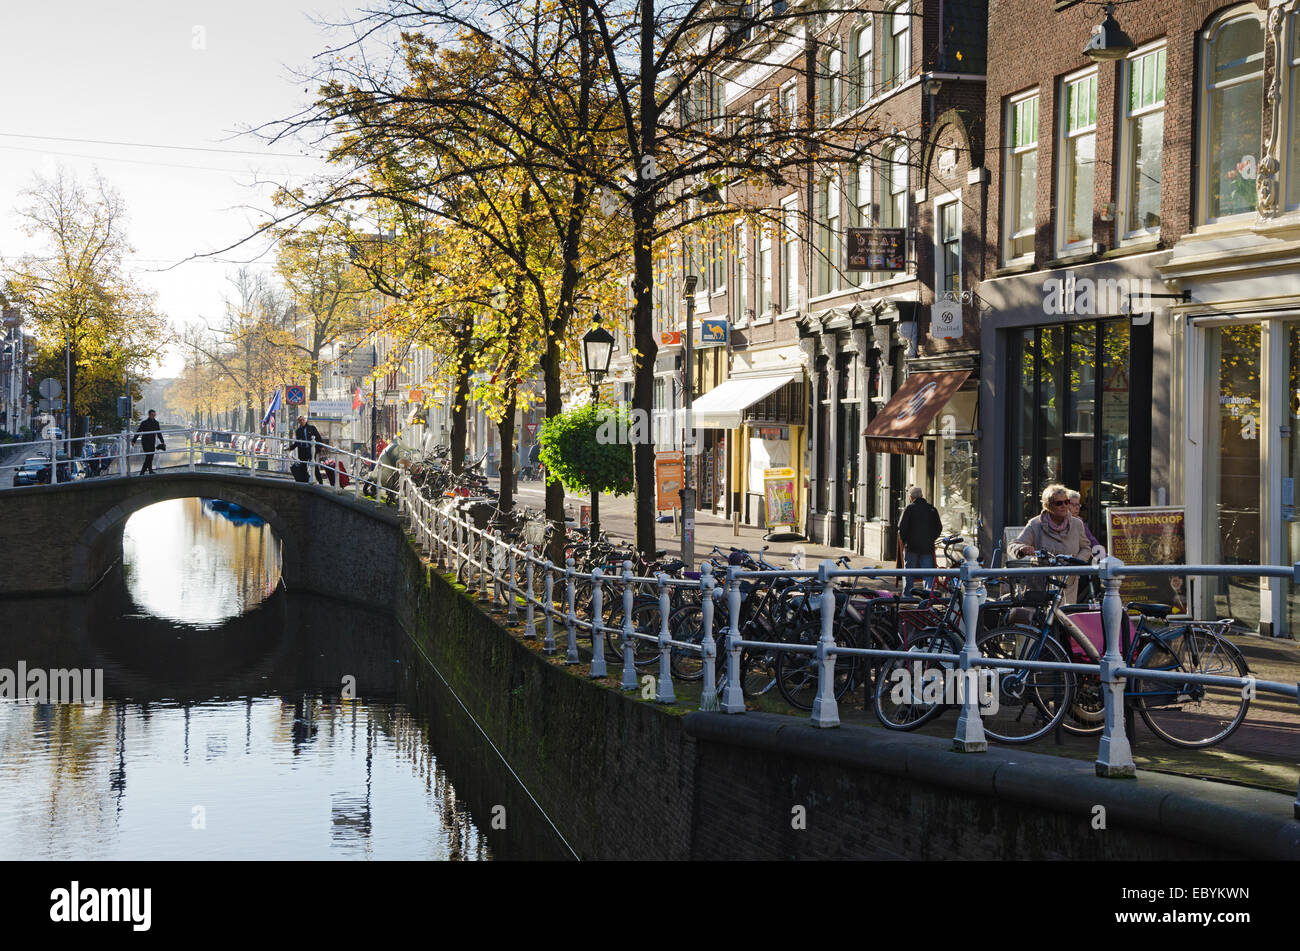 DELFT, NETHERLANDS - OCTOBER 24: A view of a portion of the town center of Delft, on October 24, 2013 in Delft, Netherlands Stock Photo